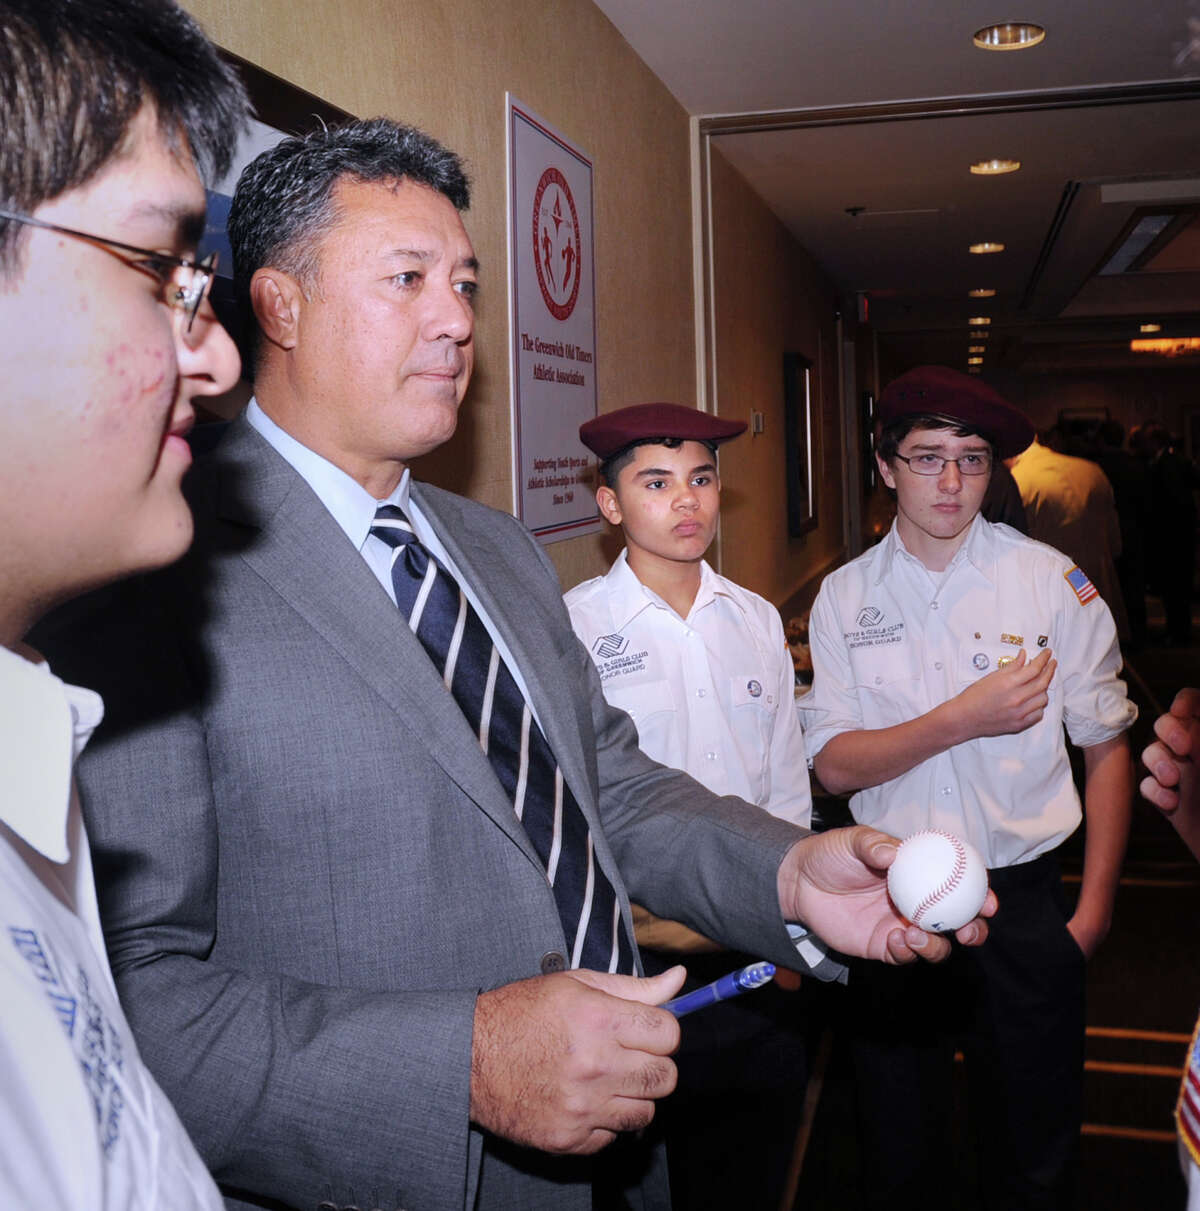 Former New York Mets pitching star Ron Darling, second from left, autographs a baseball during the 52nd Annual Greenwich Old Timers Awards Dinner at the Hyatt Regency Greenwich, Friday night, November 9, 2012. Standing from left to right, with Darling, are Greenwich Boys & Girls Club Honor Guard members, Victor Sanchez, 15, Emilio Rojas, 13, and Peter Hughes, 16. Darling was honored during the dinner.